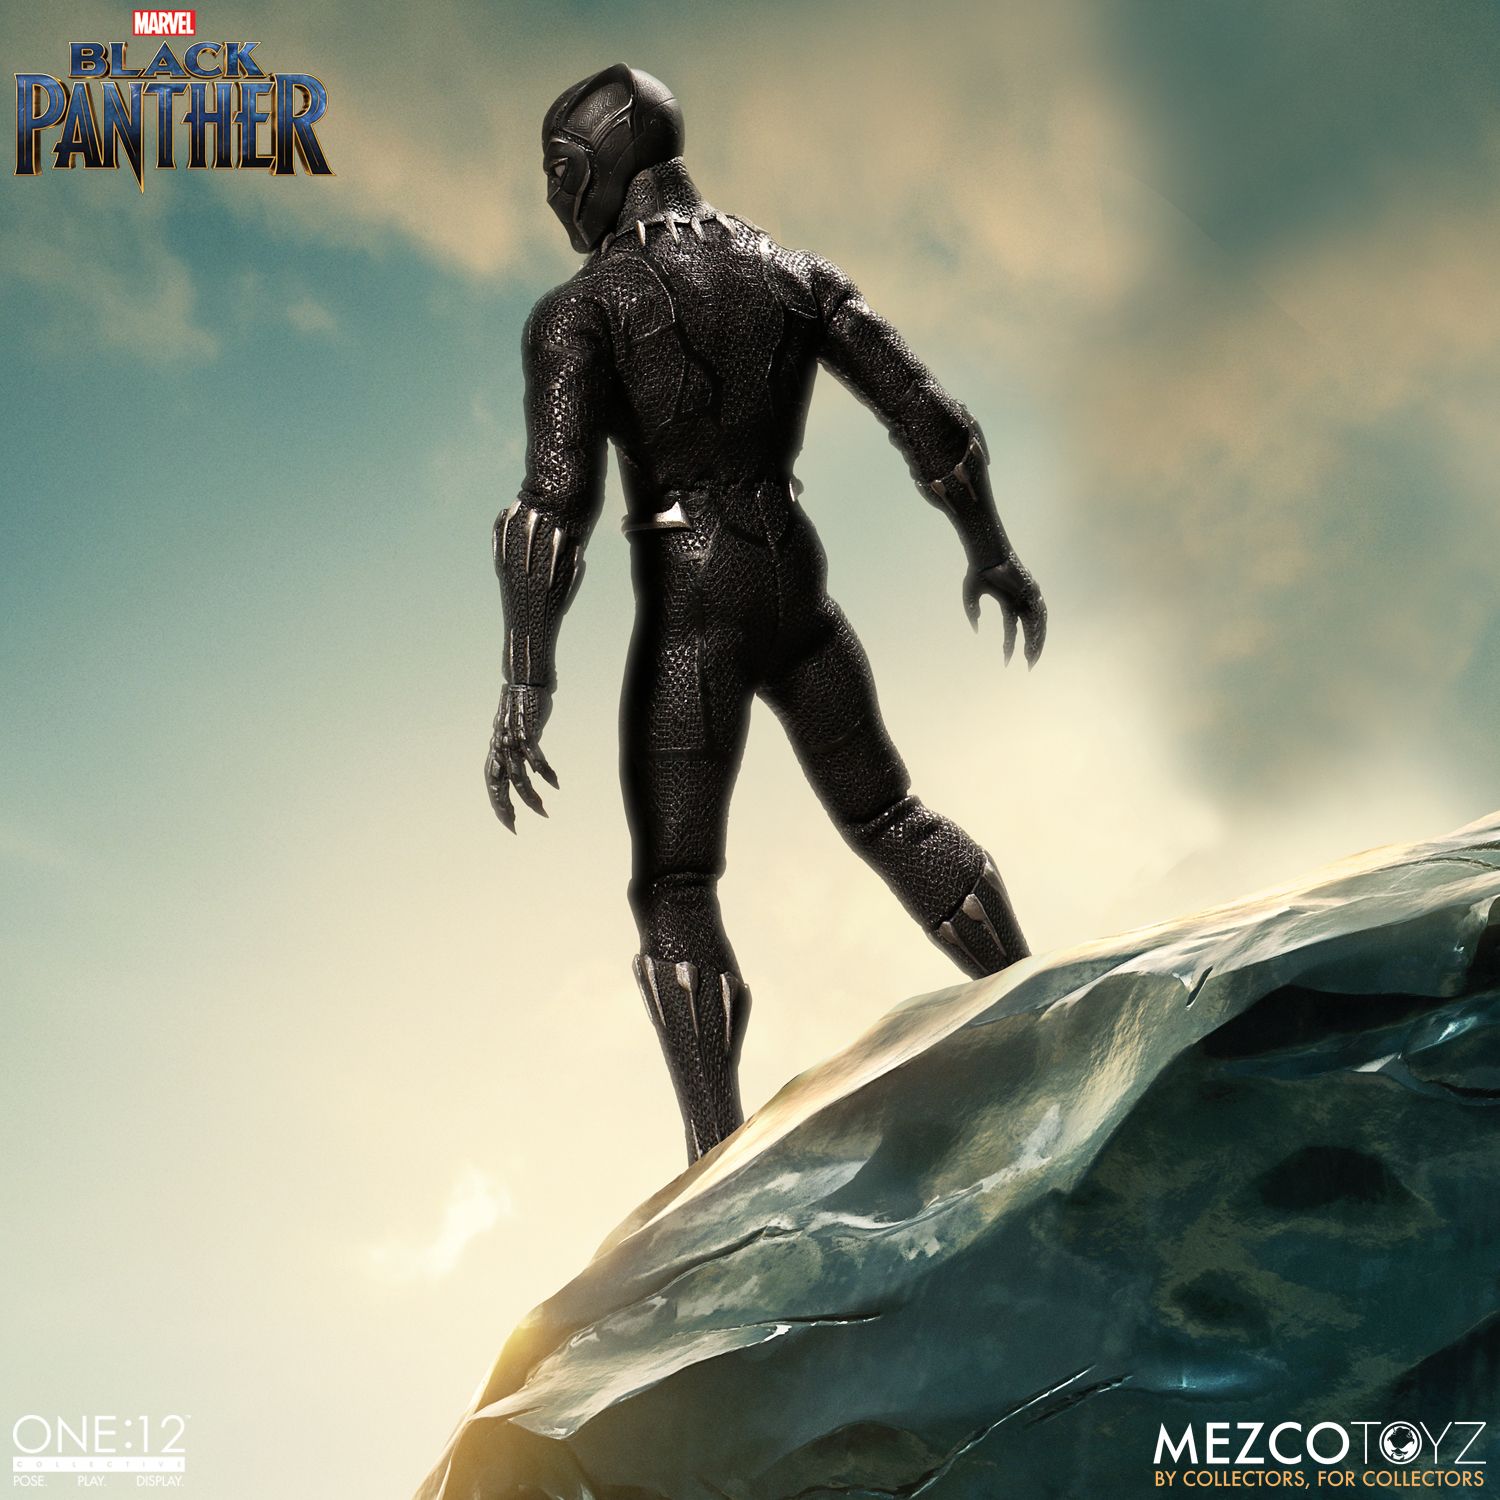 One:12 Black Panther Mezco NEW Authentic Collective One 12 Action Figure 